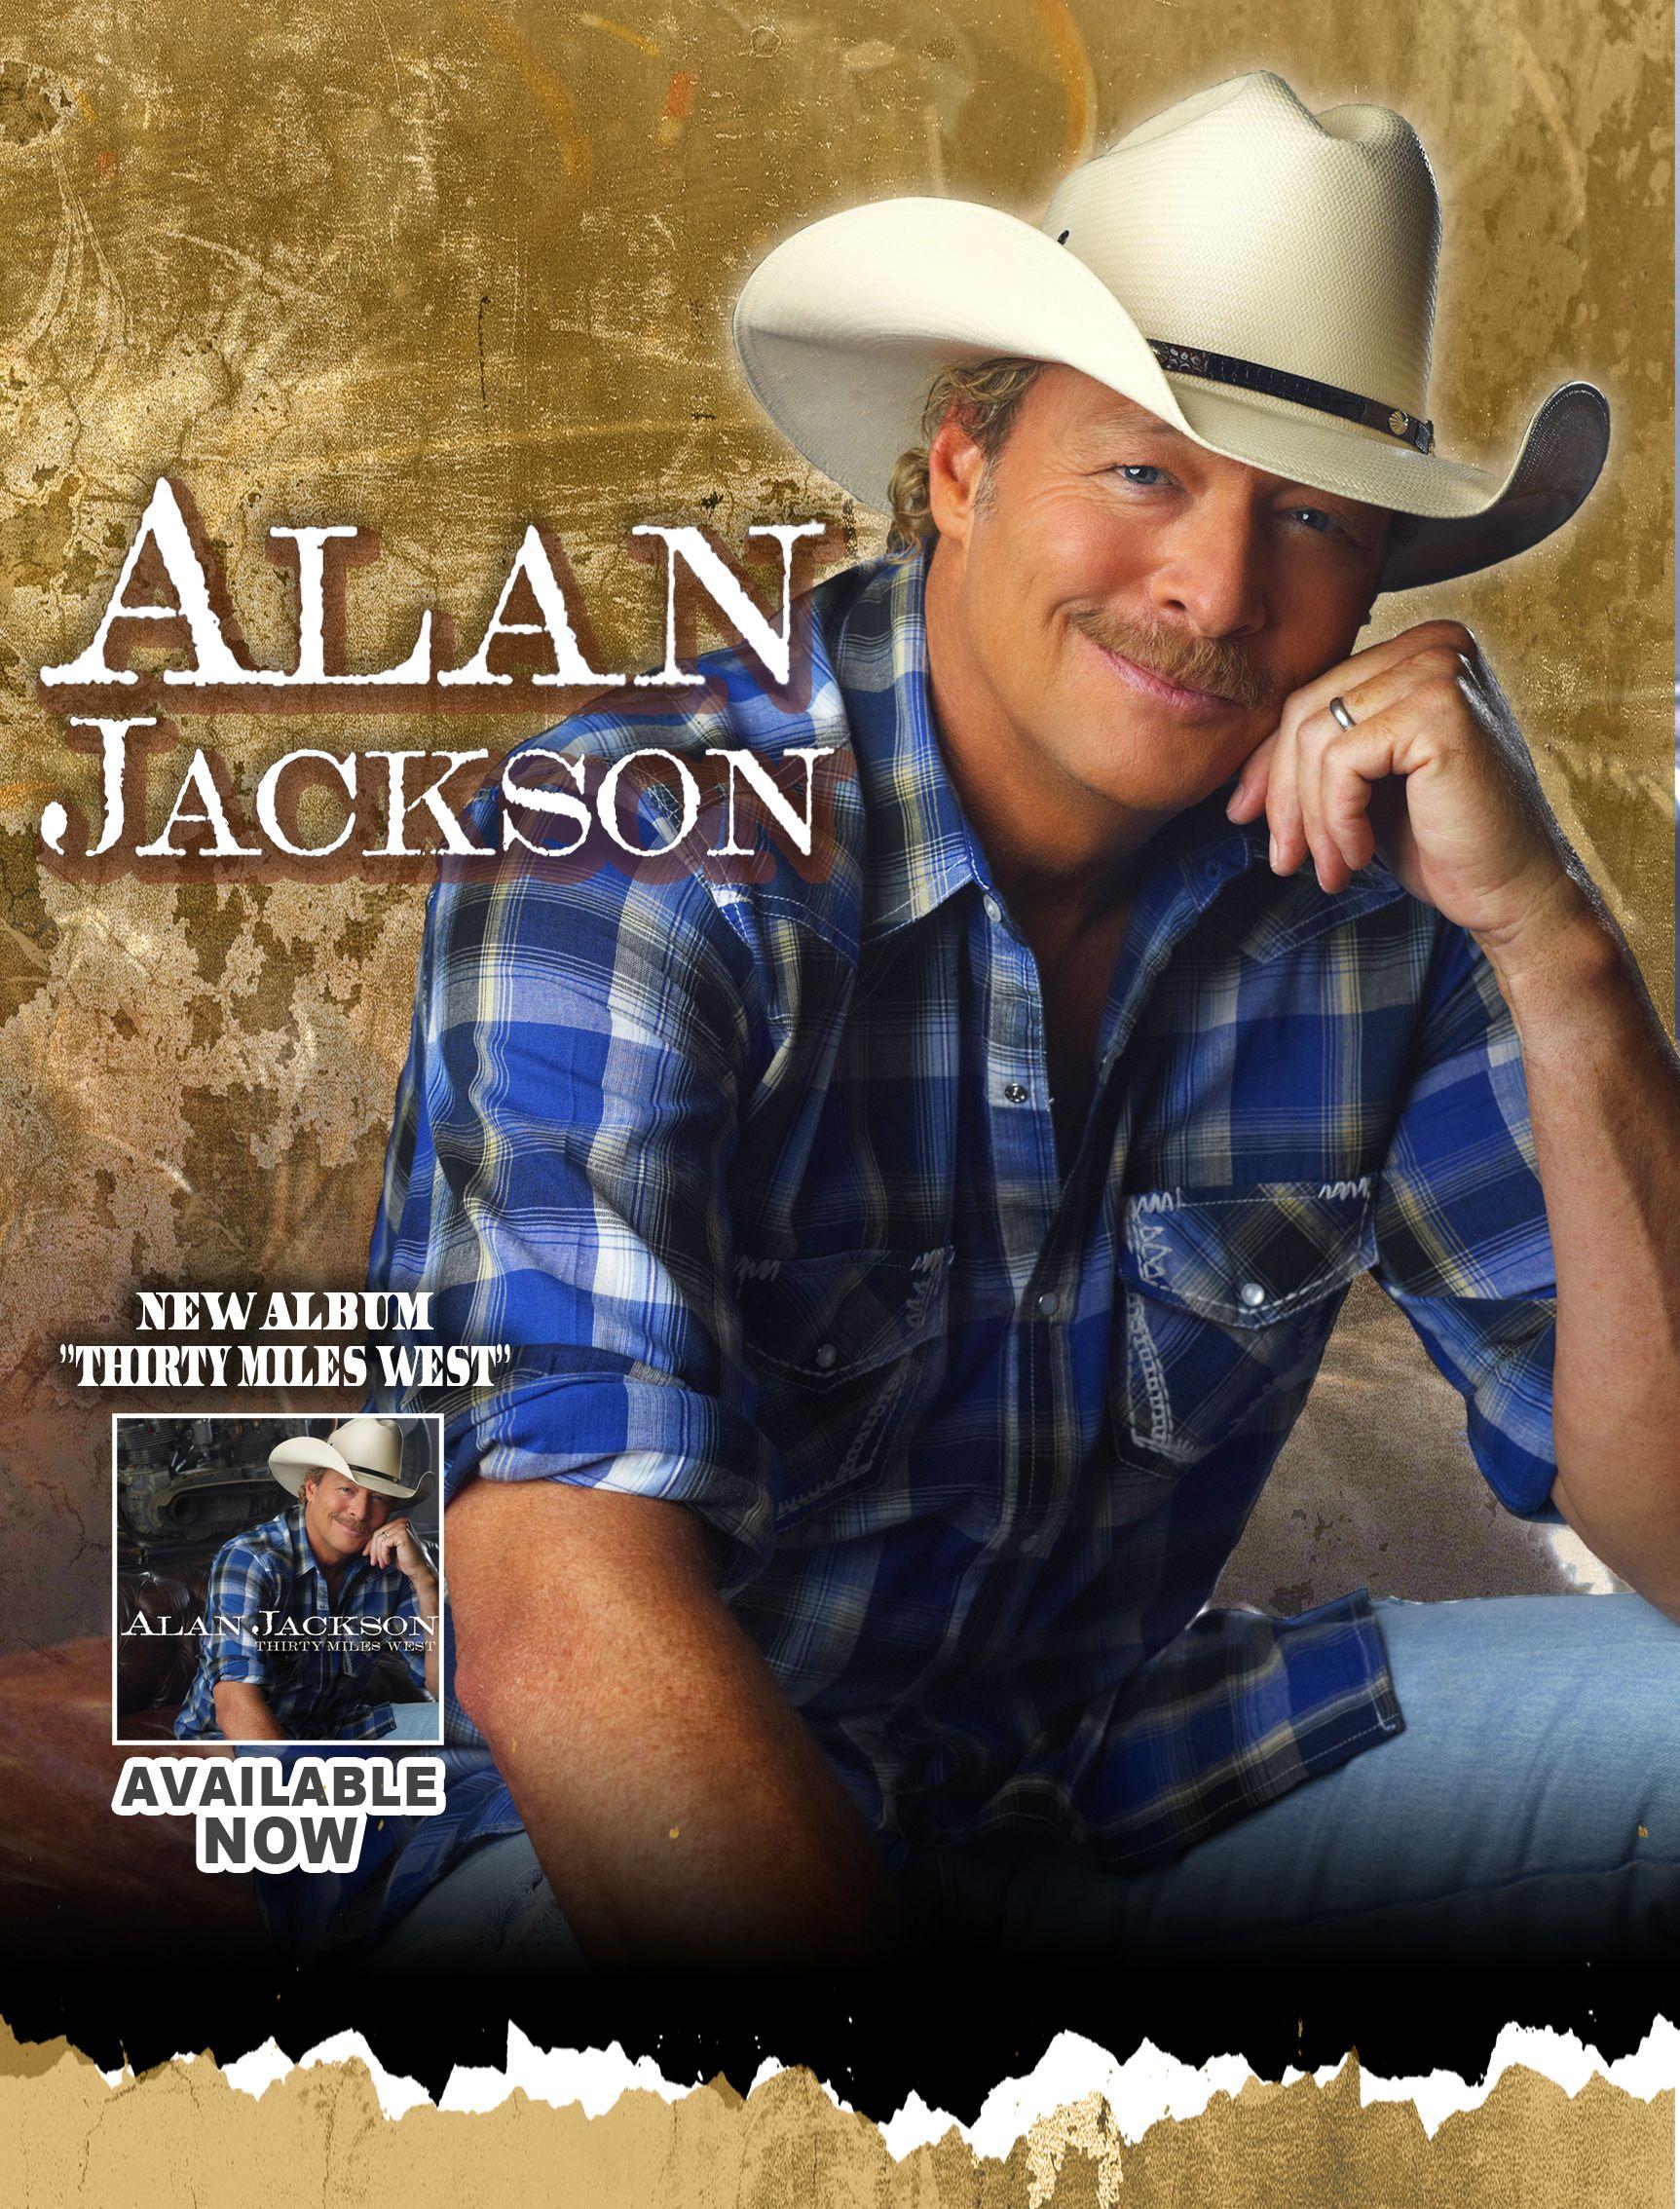 Alan Jackson Wallpaper 3 Canvas Poster Wall Art Decor Print Picture  Paintings for Living Room Bedroom Decoration Unframe2436inch6090cm   Amazoncouk Home  Kitchen